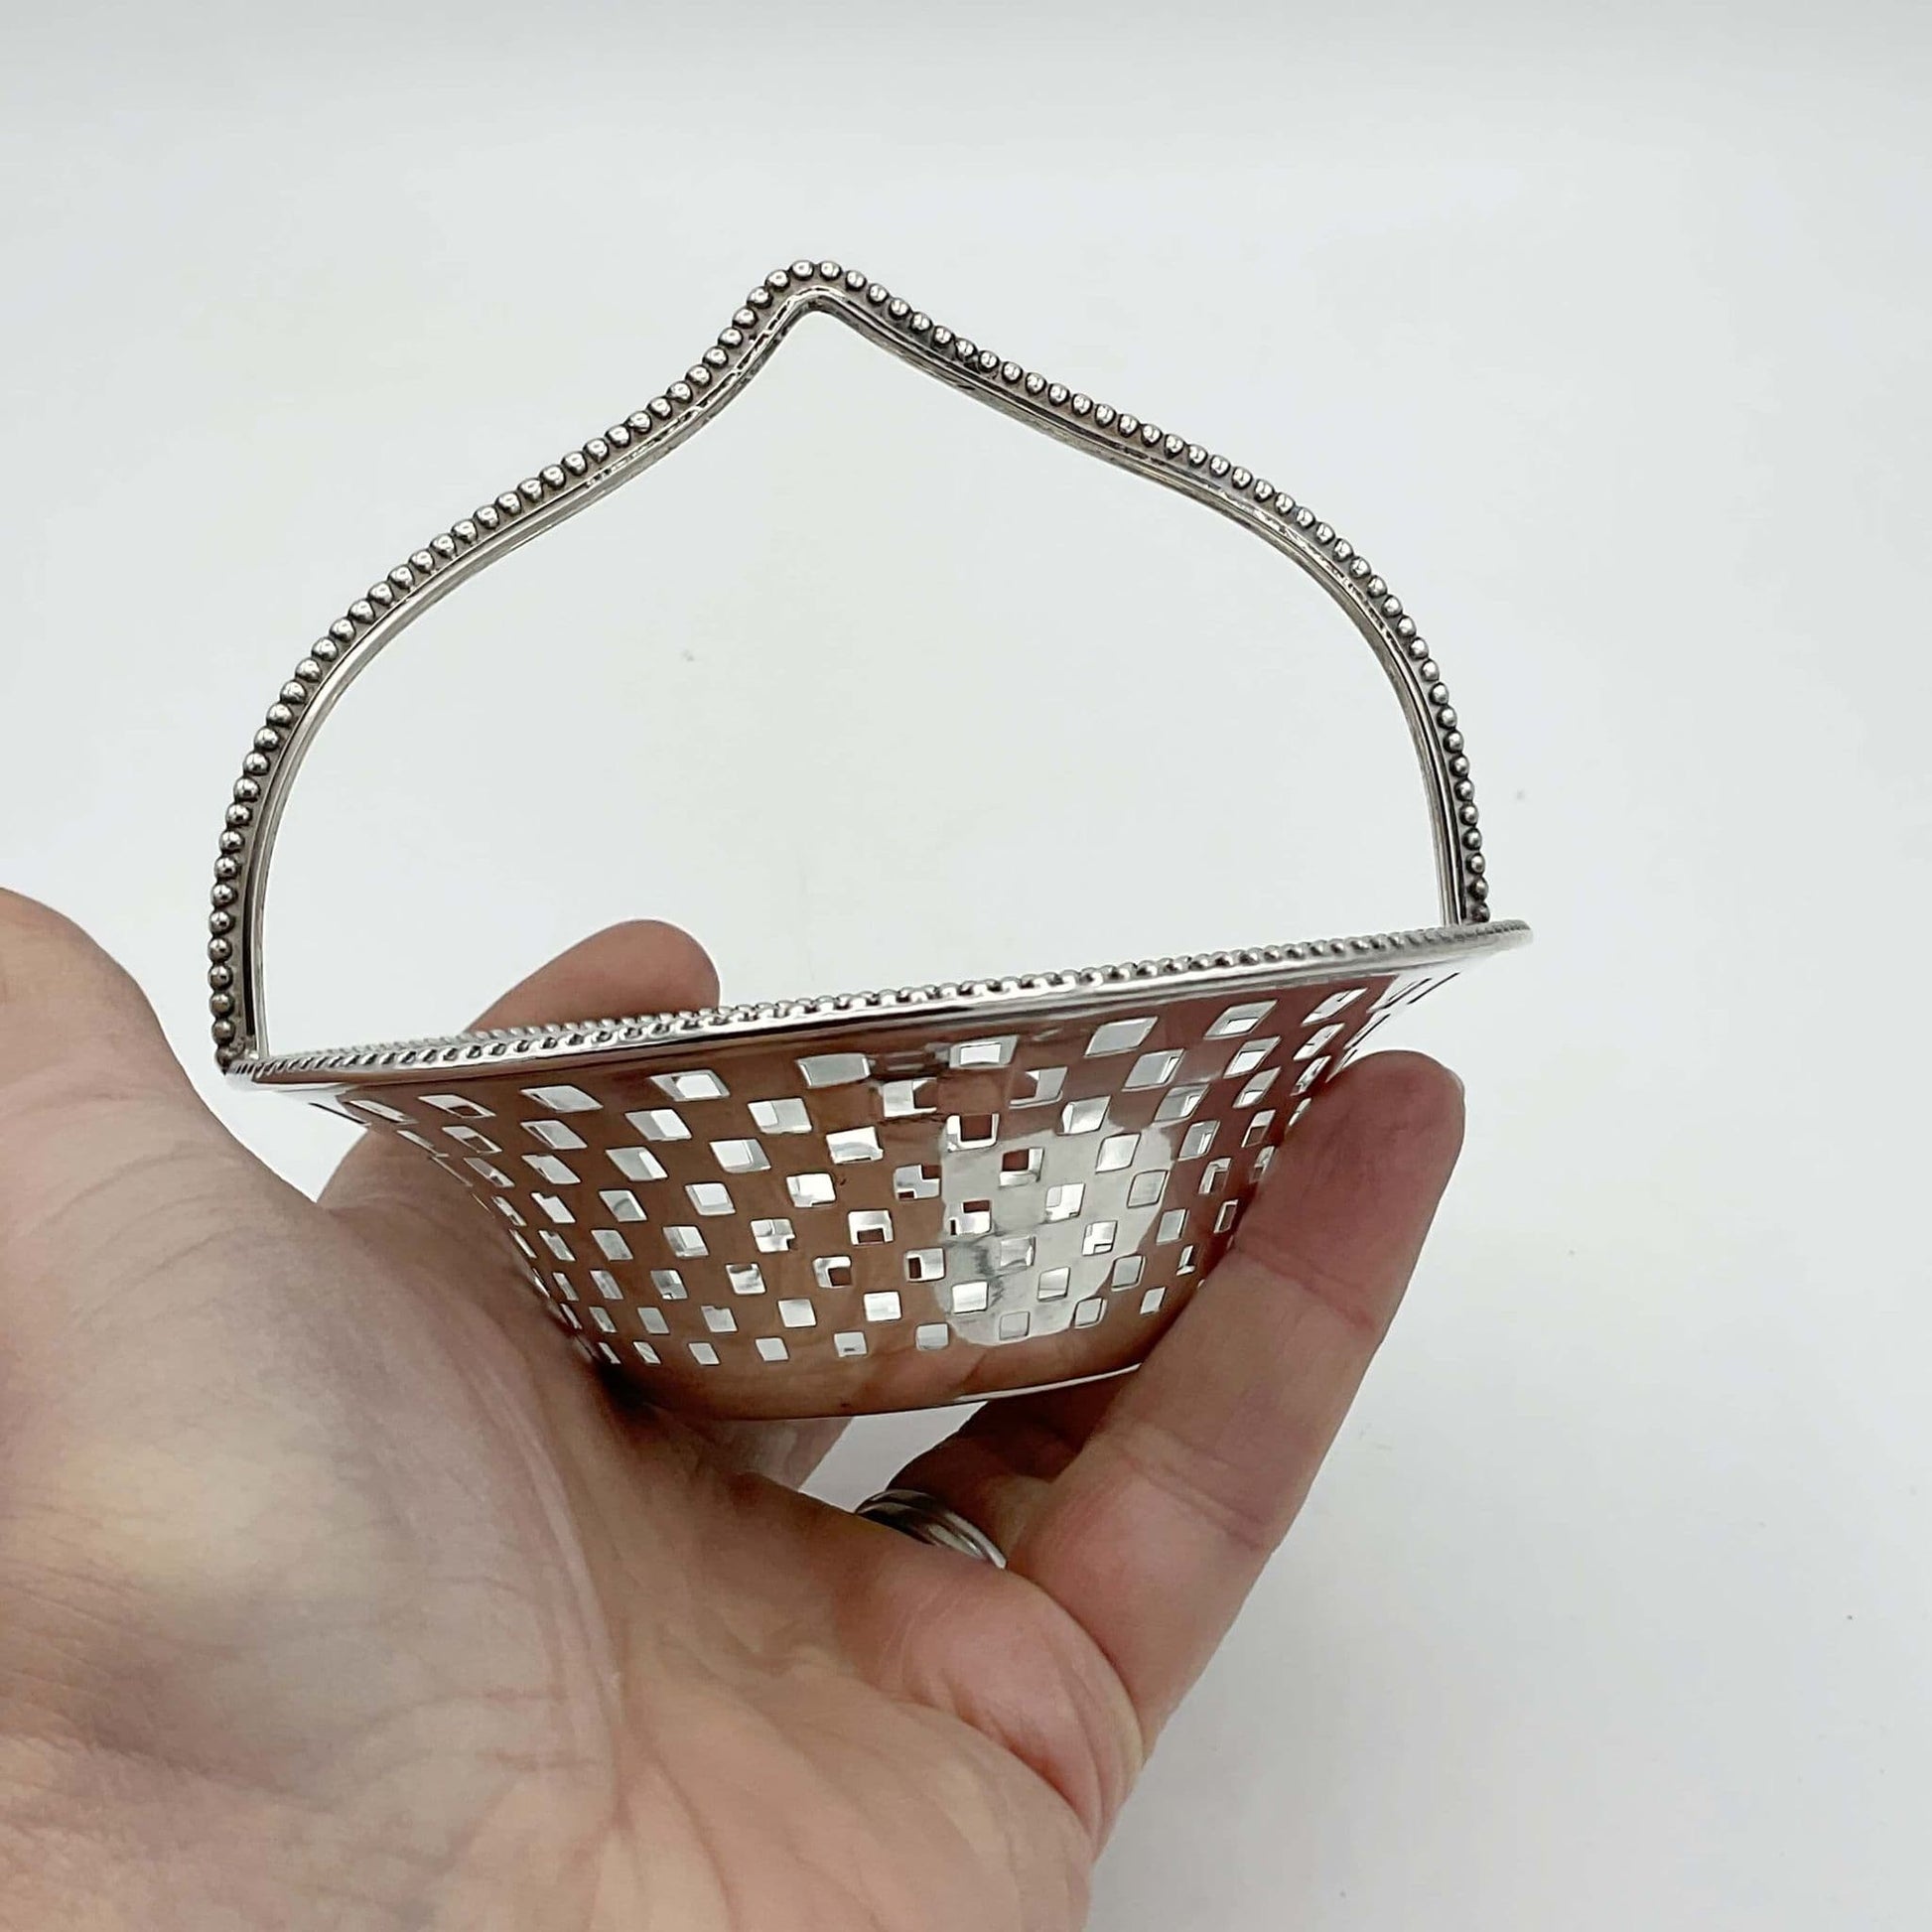 Antique Silver Basket with handle on white background held in a hand